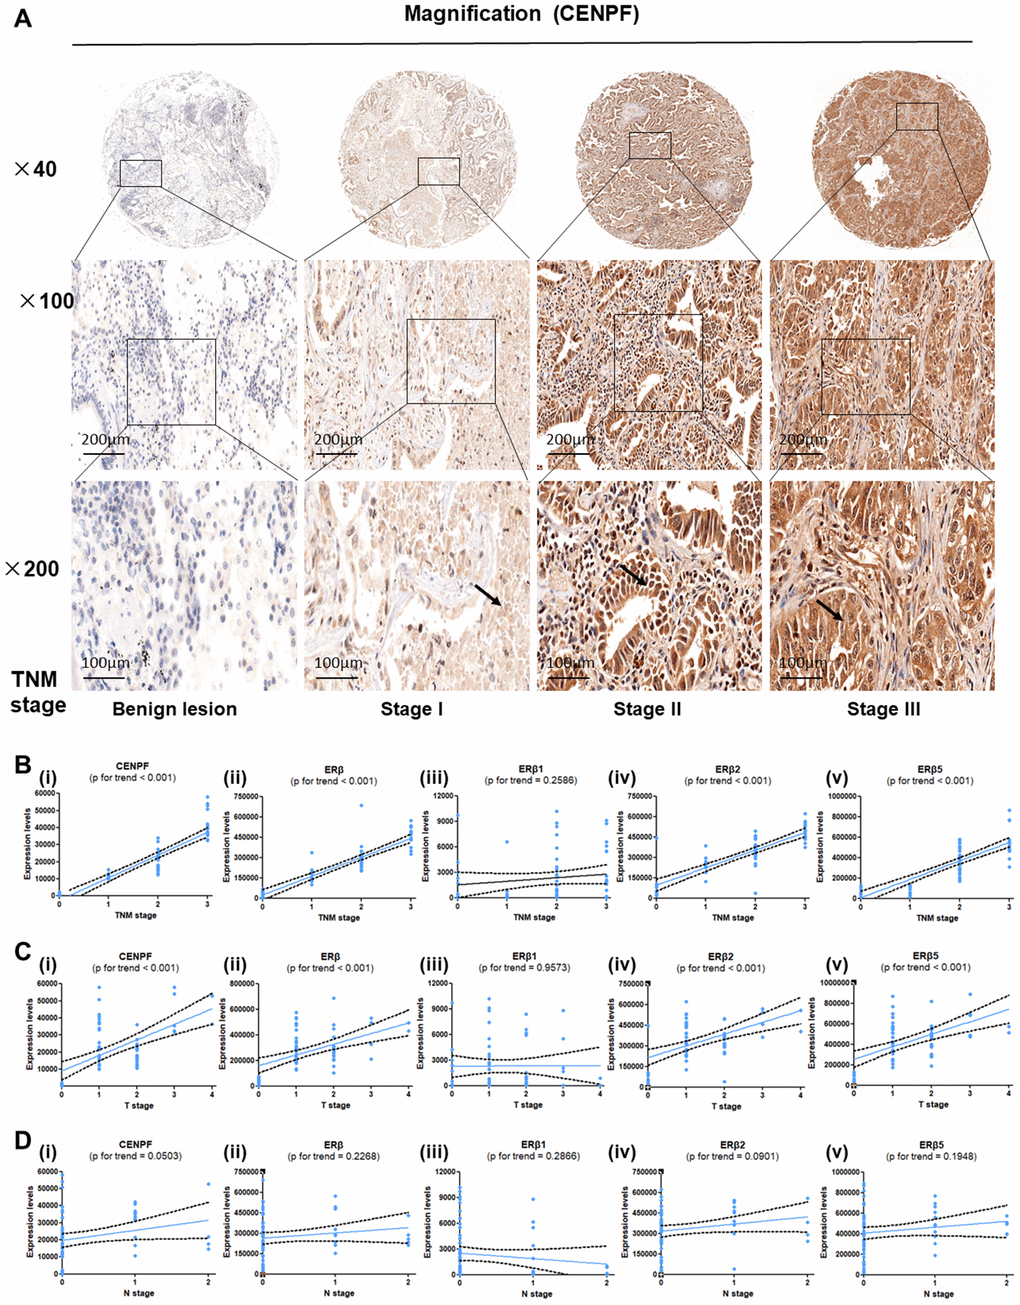 Expression of CENPF, ERβ, ERβ2 and ERβ5 are associated with T stage and TNM stage in LUAD patients. (A) Tissue microarray (TMA) was used to analyze the expression of CENPF in benign lung lesions and different TNM staging tissues of LUAD. The magnification of each slice is 40×, 100×, 200× in order. (B–D) Analysis of the relationship between the expression of CENPF, ERβ, ERβ1, ERβ2 and ERβ5 and the TNM staging or T stage or N stage of LUAD. The corresponding P value is marked above the picture.